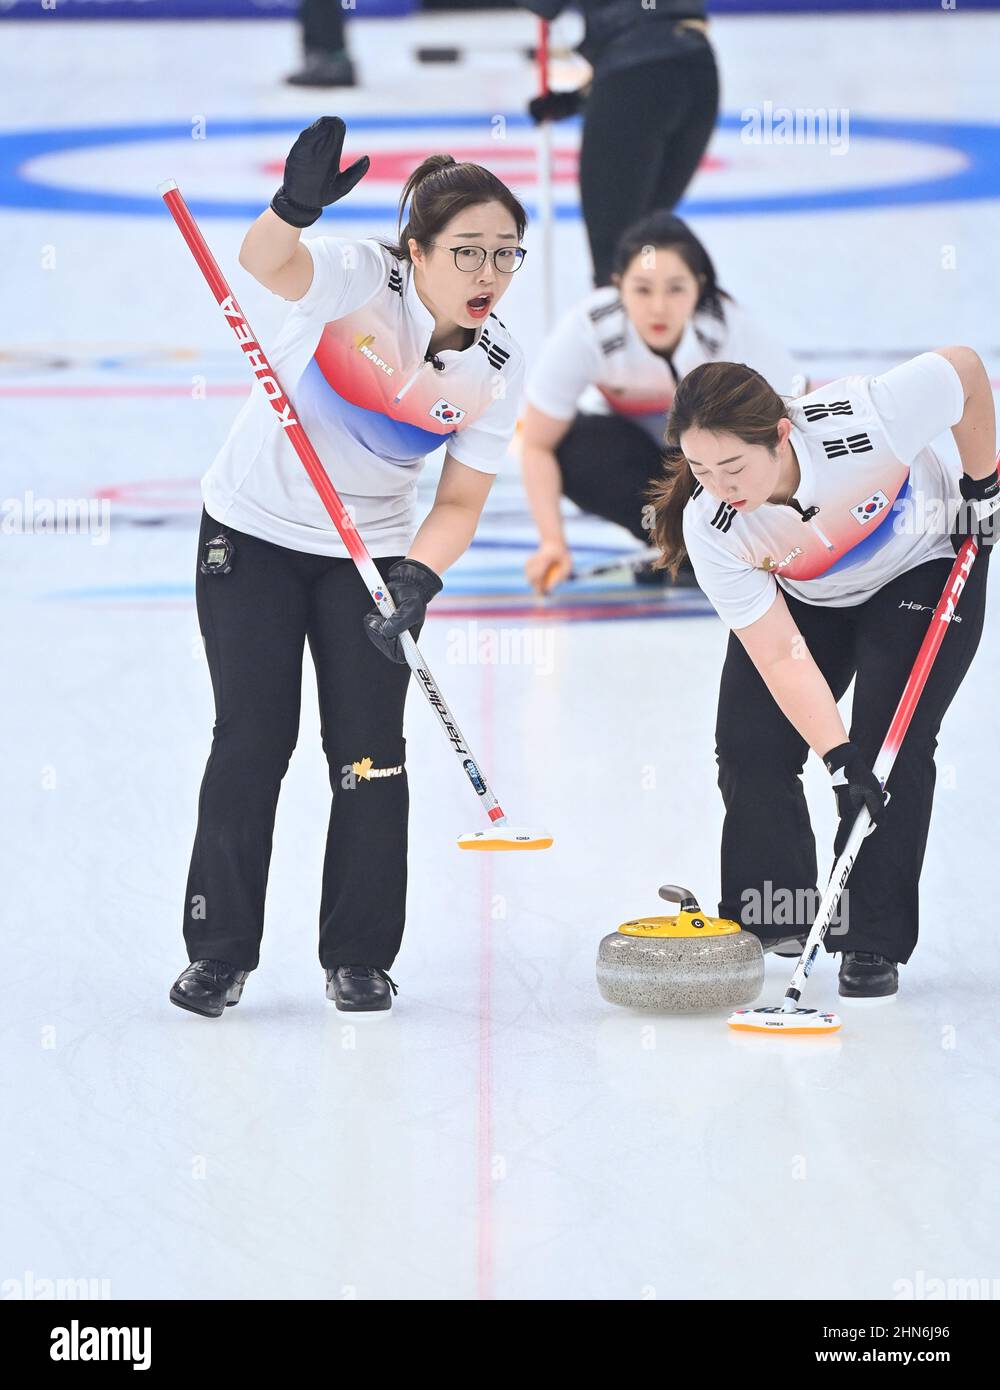 Beijing, China. 14th Feb, 2022. Kim SeonYeong (L) competes during the Curling Women's Round Robin Session 8 of the Beijing 2022 Winter Olympics between Japan and South Korea at the National Aquatics Centre in Beijing, capital of China, Feb. 14, 2022. Credit: Huang Xiaobang/Xinhua/Alamy Live News Stock Photo